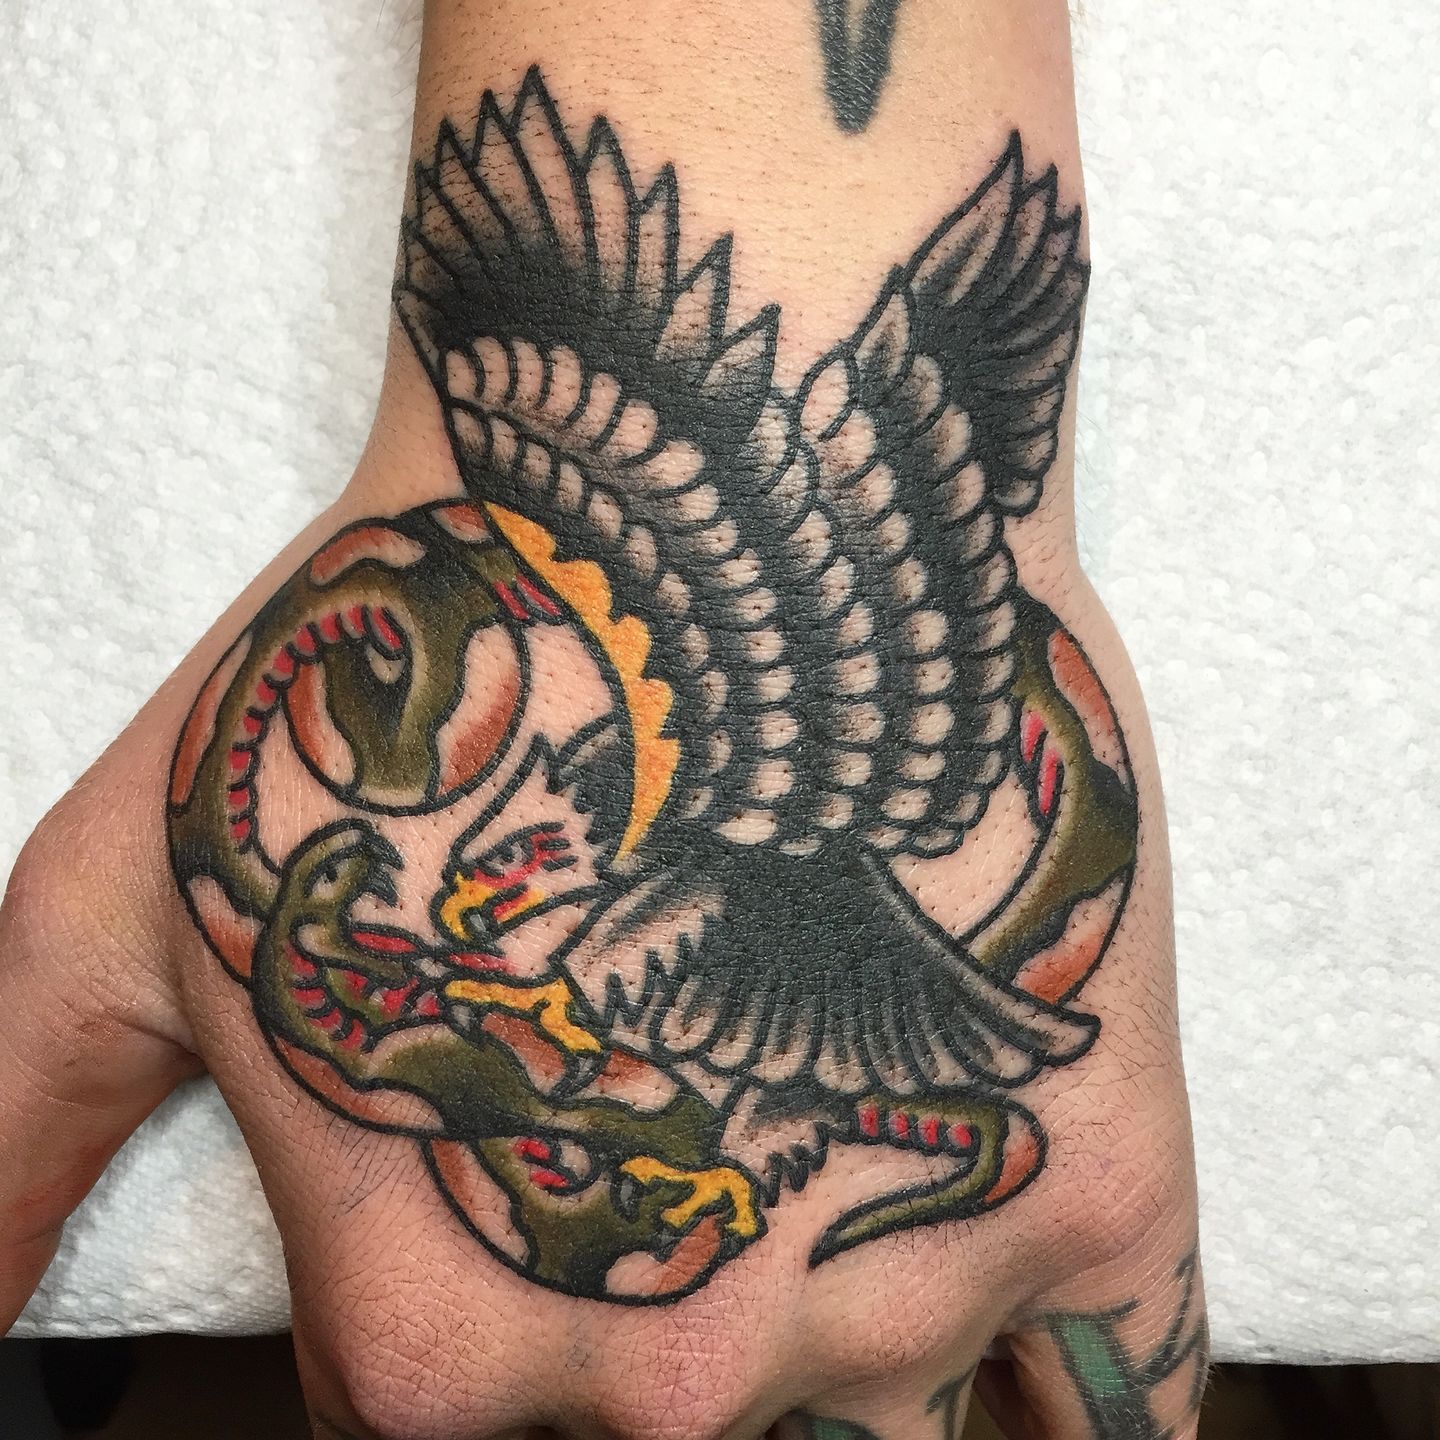 EAGLE SNAKE TATTOO CLASSIC DESIGN DRAWING AMERICAN TRADITIONAL 